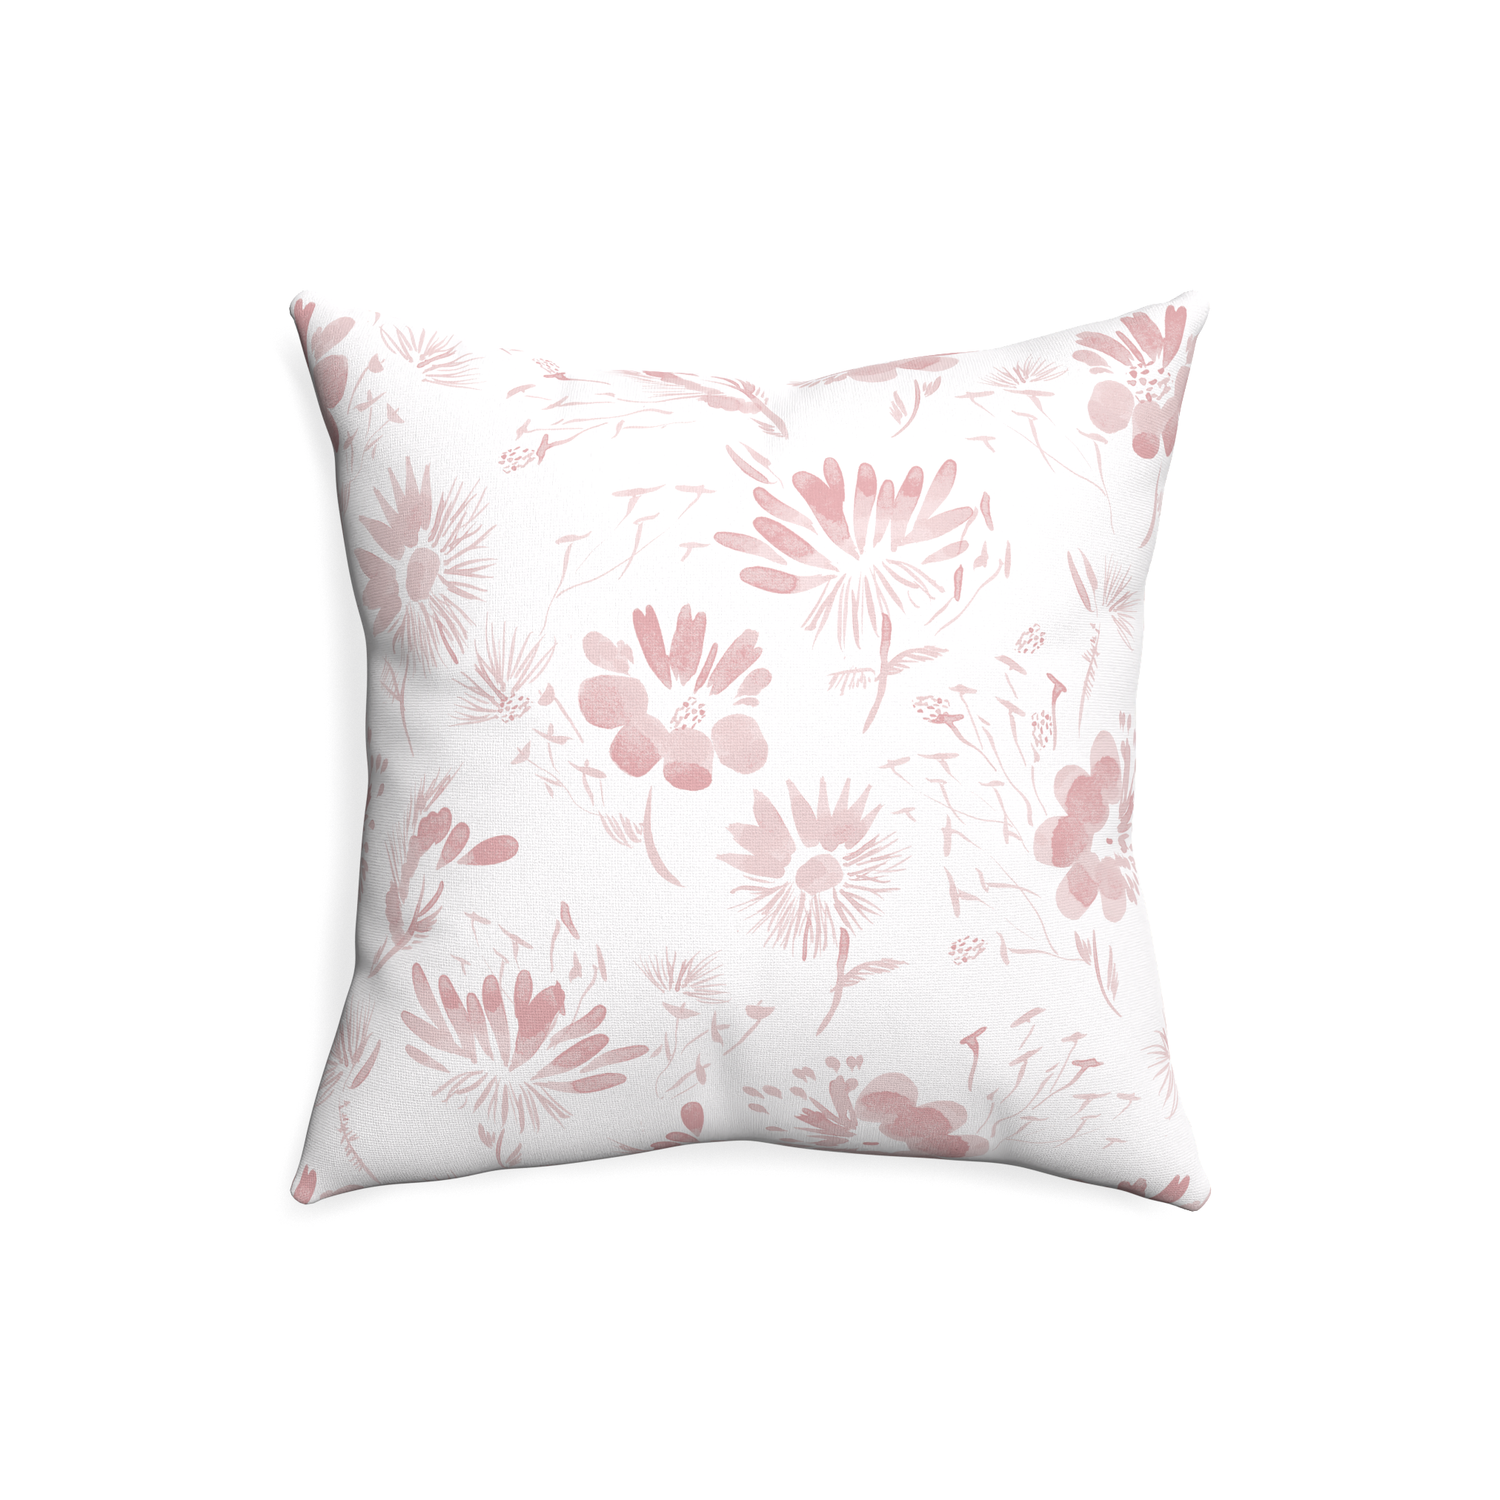 20-square blake custom pink floralpillow with none on white background